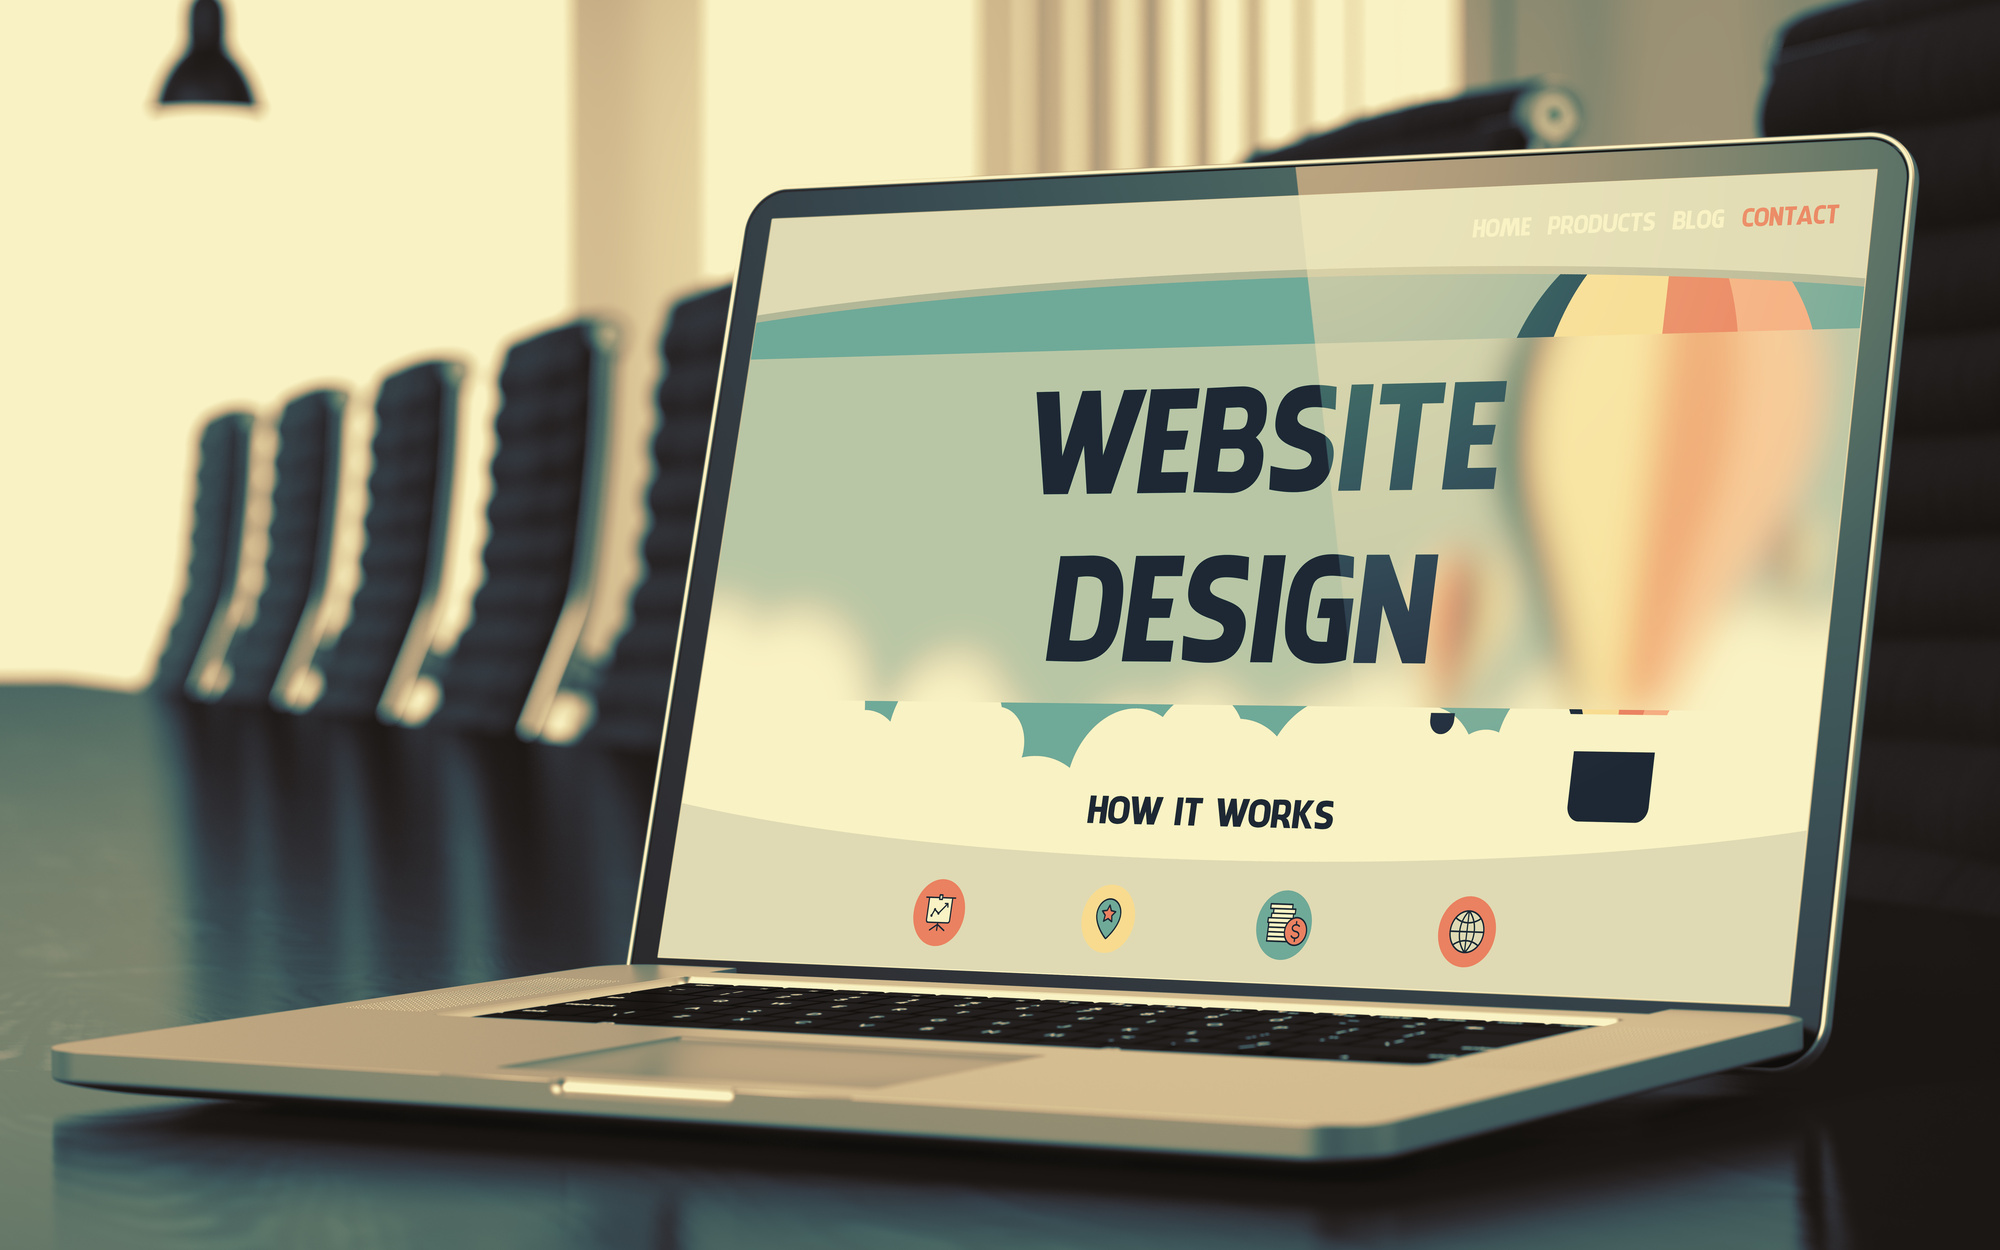 What Makes a Great Website? 6 Surefire Design Tips